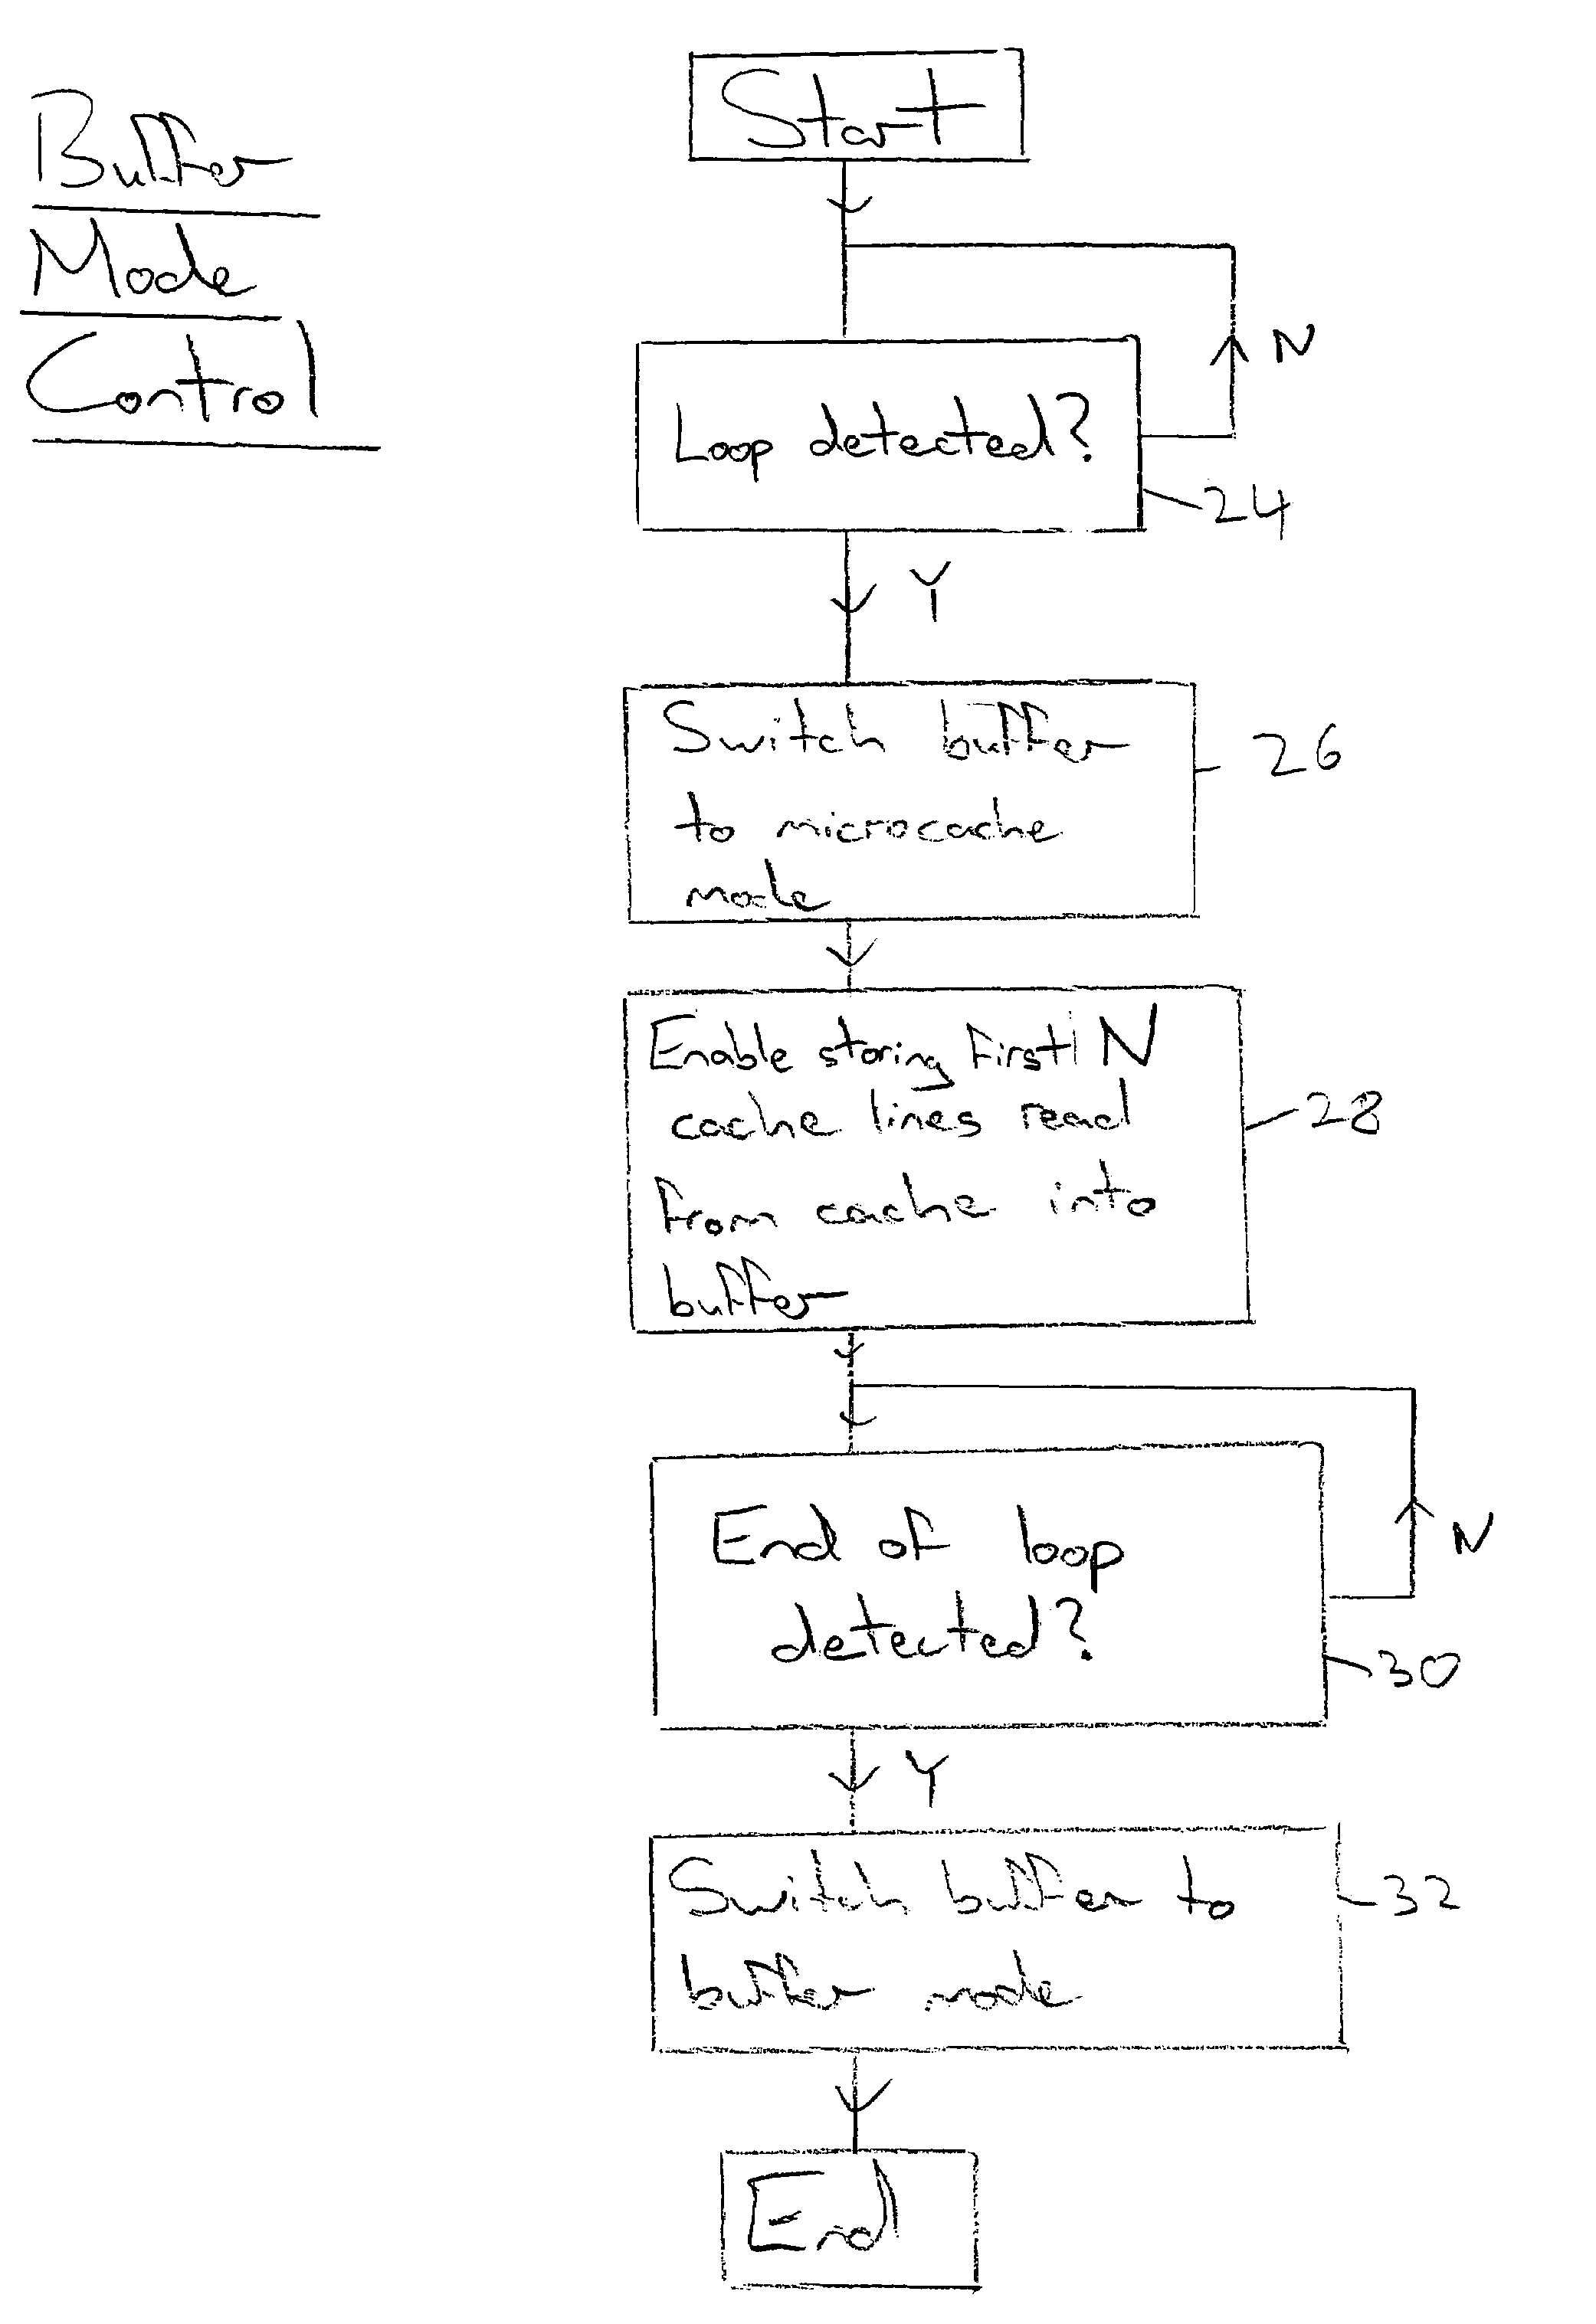 Reusing a buffer memory as a microcache for program instructions of a detected program loop